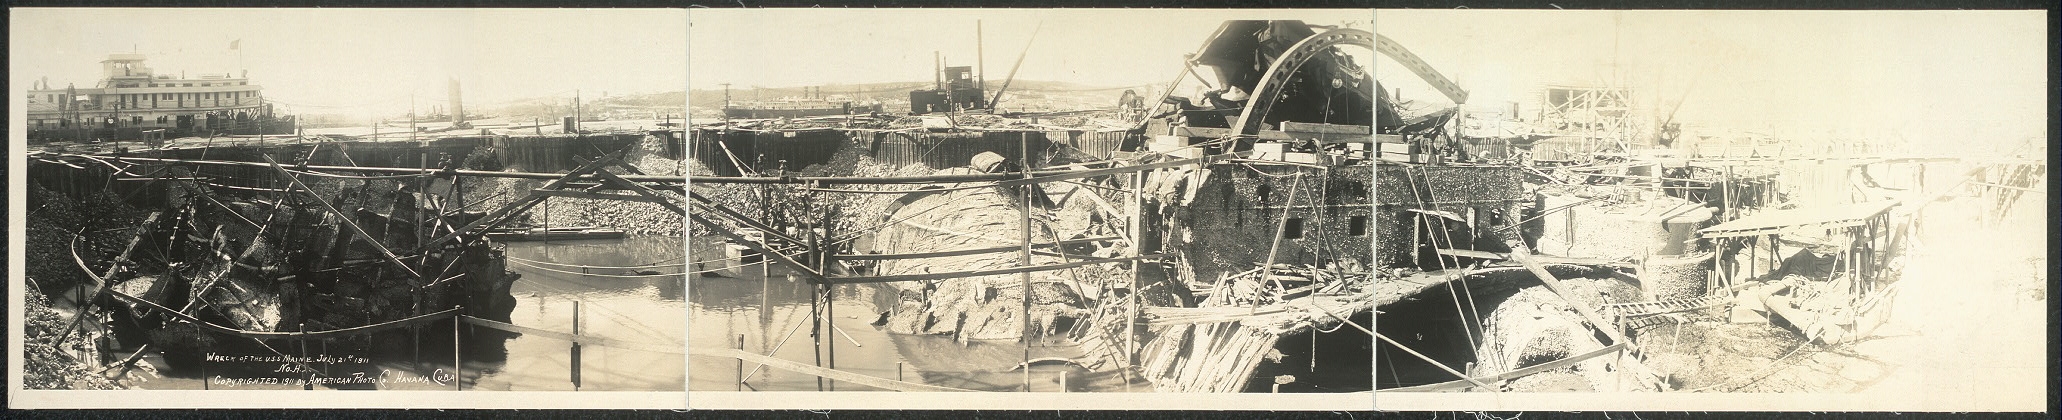 Wreck of the U.S.S. Maine, July 21st, 1911